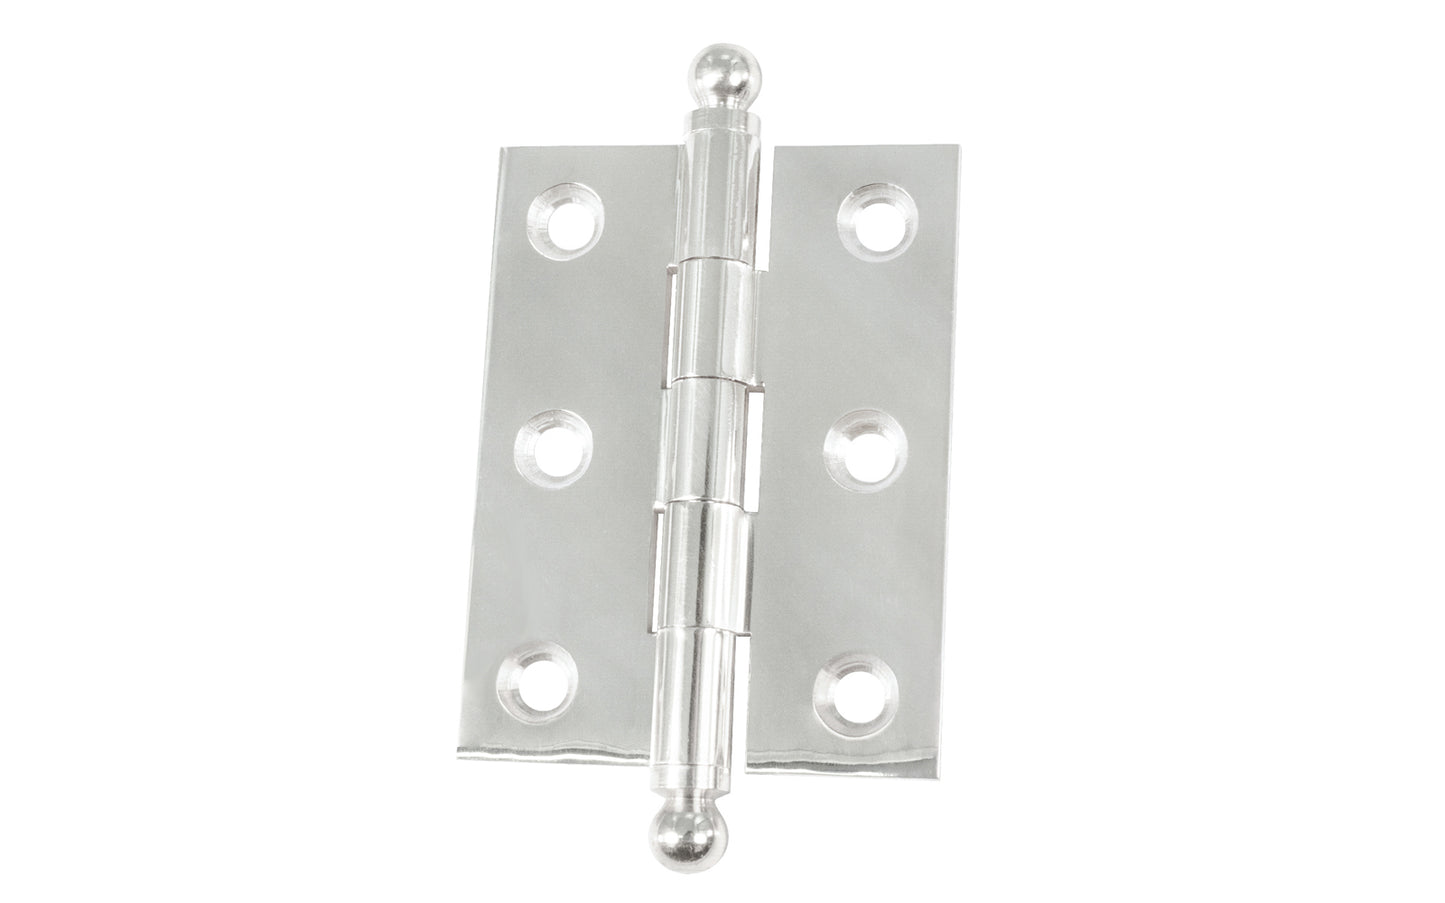 Classic Solid Brass Ball-Tip Cabinet Hinge ~ 2" x 1-1/2". Full mortise extruded hinges. 3/32" heavy duty leaf thickness gauge. Non-removable fixed hinge pin with ball tips. High quality thick cabinet hinge with ball tips. Polished Chrome finish.